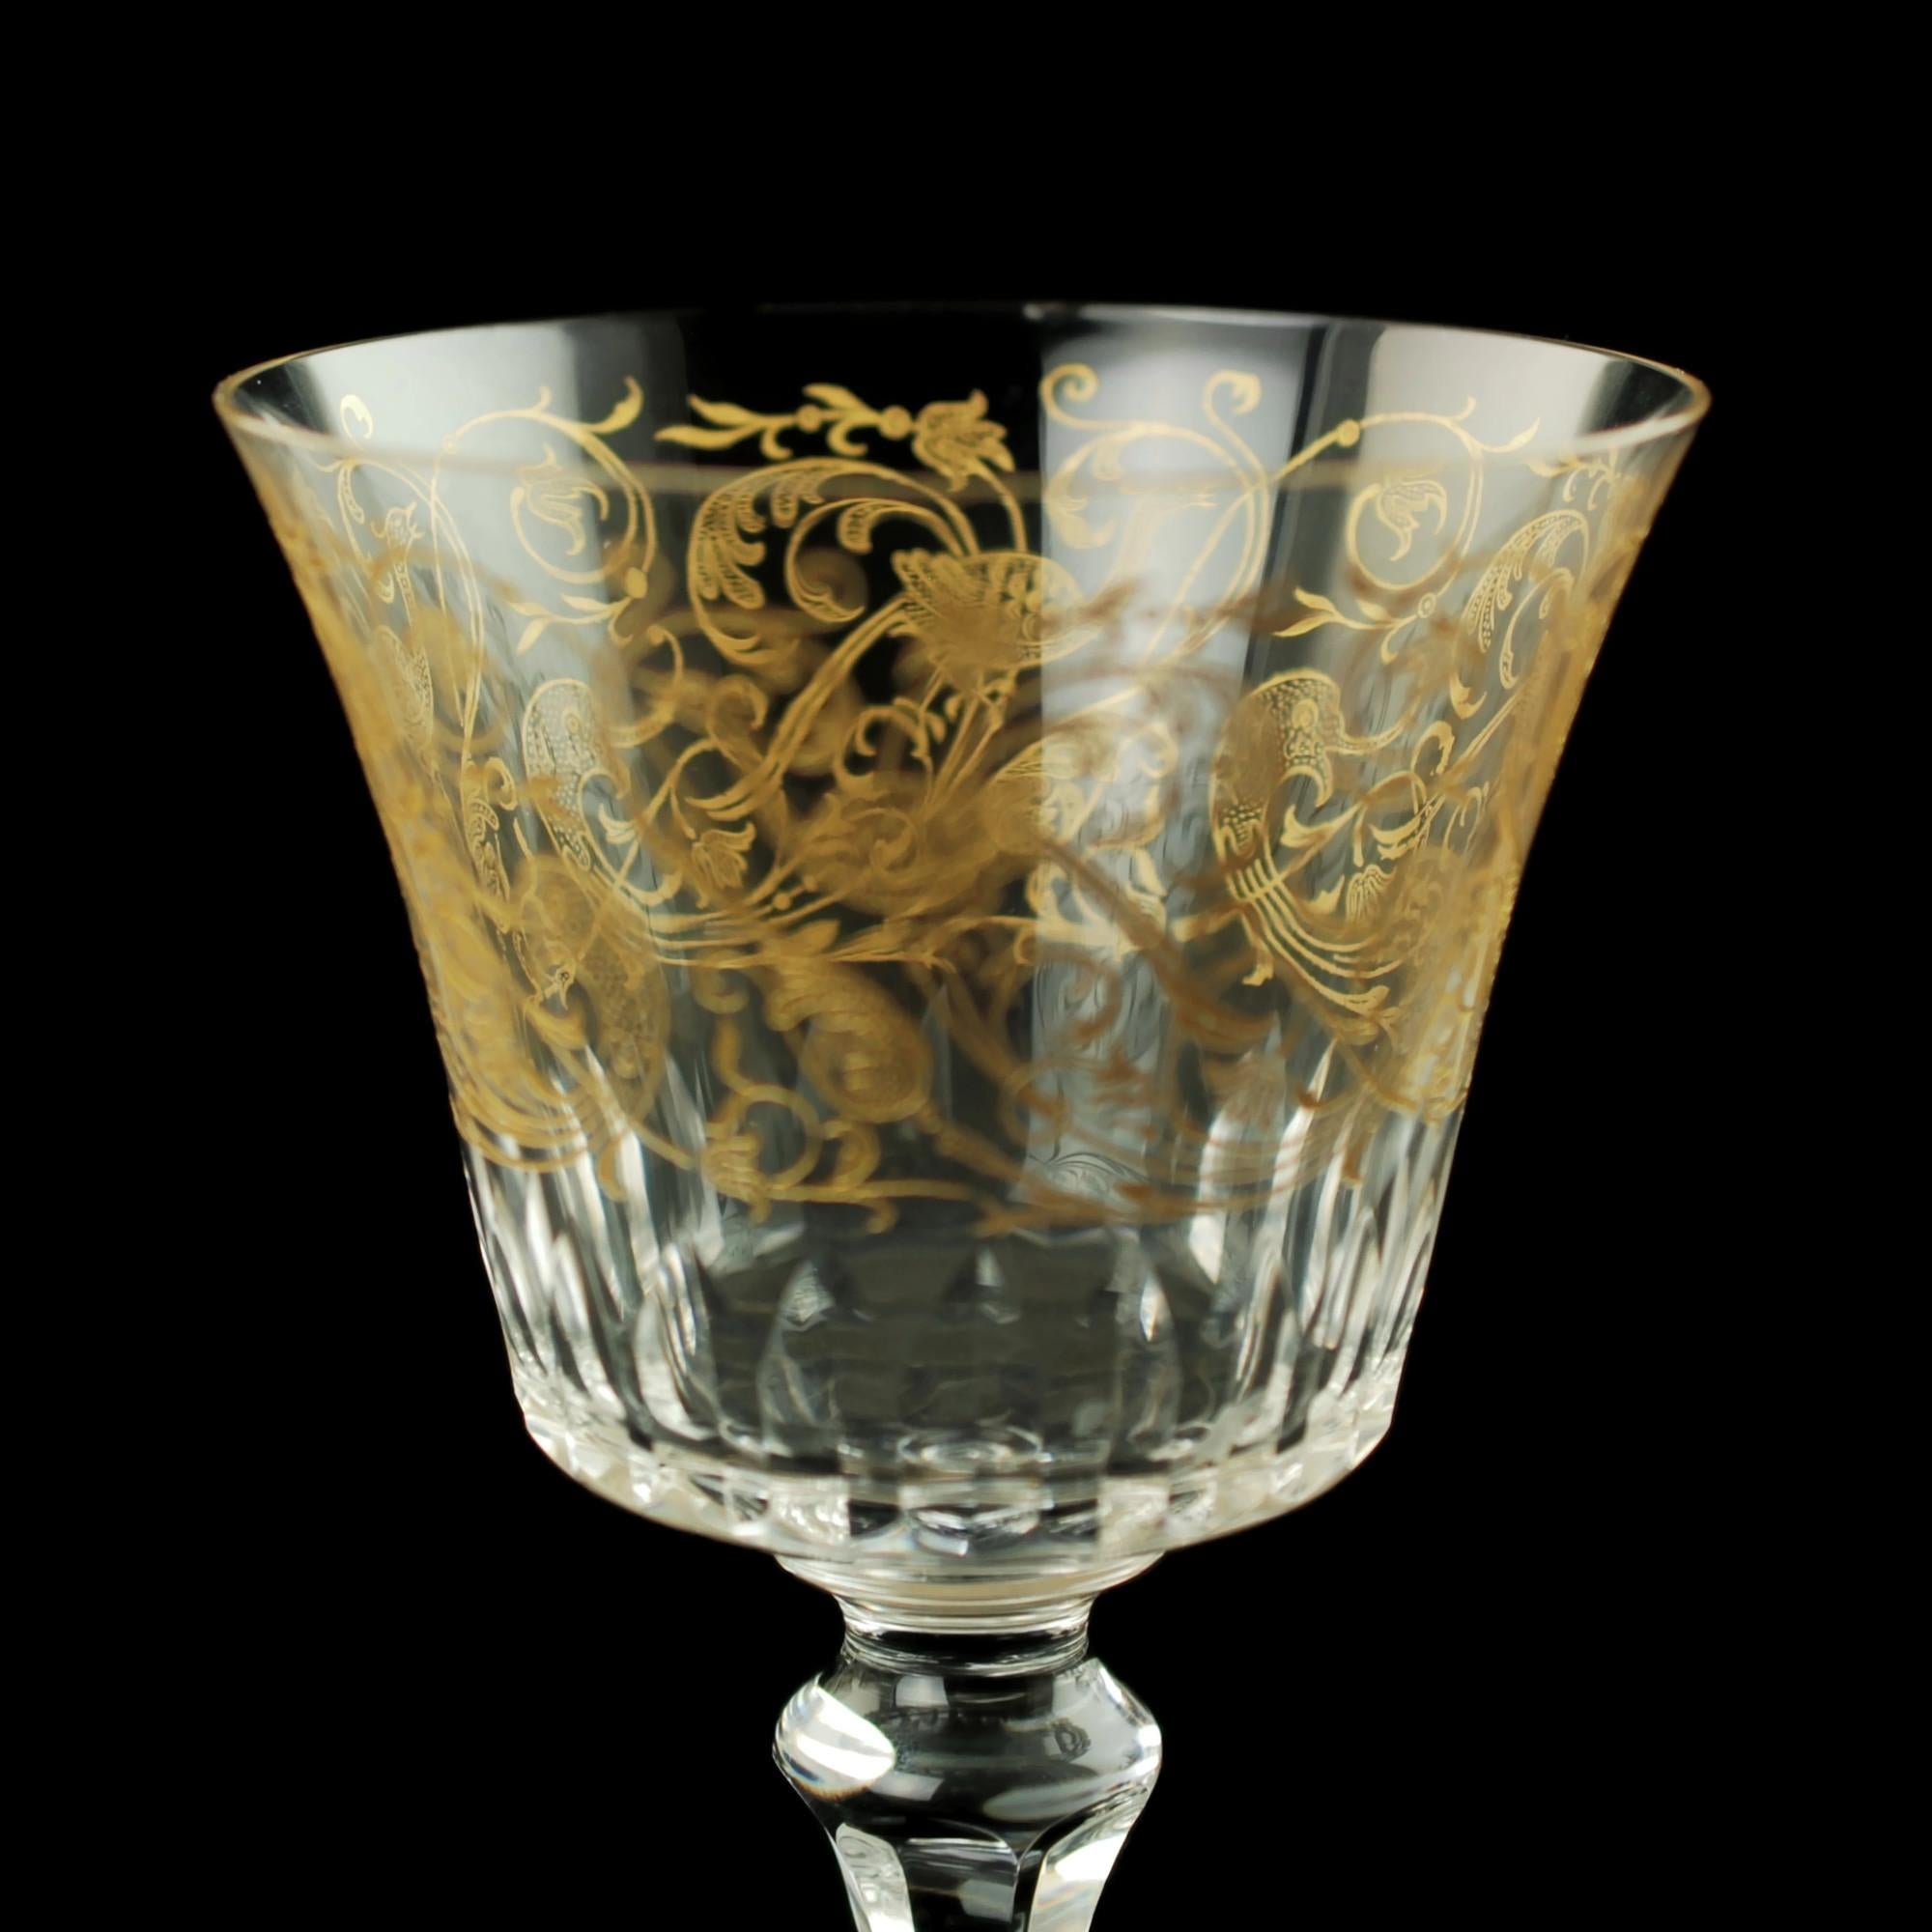 Baccarat Bergame Parme Gilt Etched Crystal Glasses with Paneled Stems Set of 16 For Sale 6